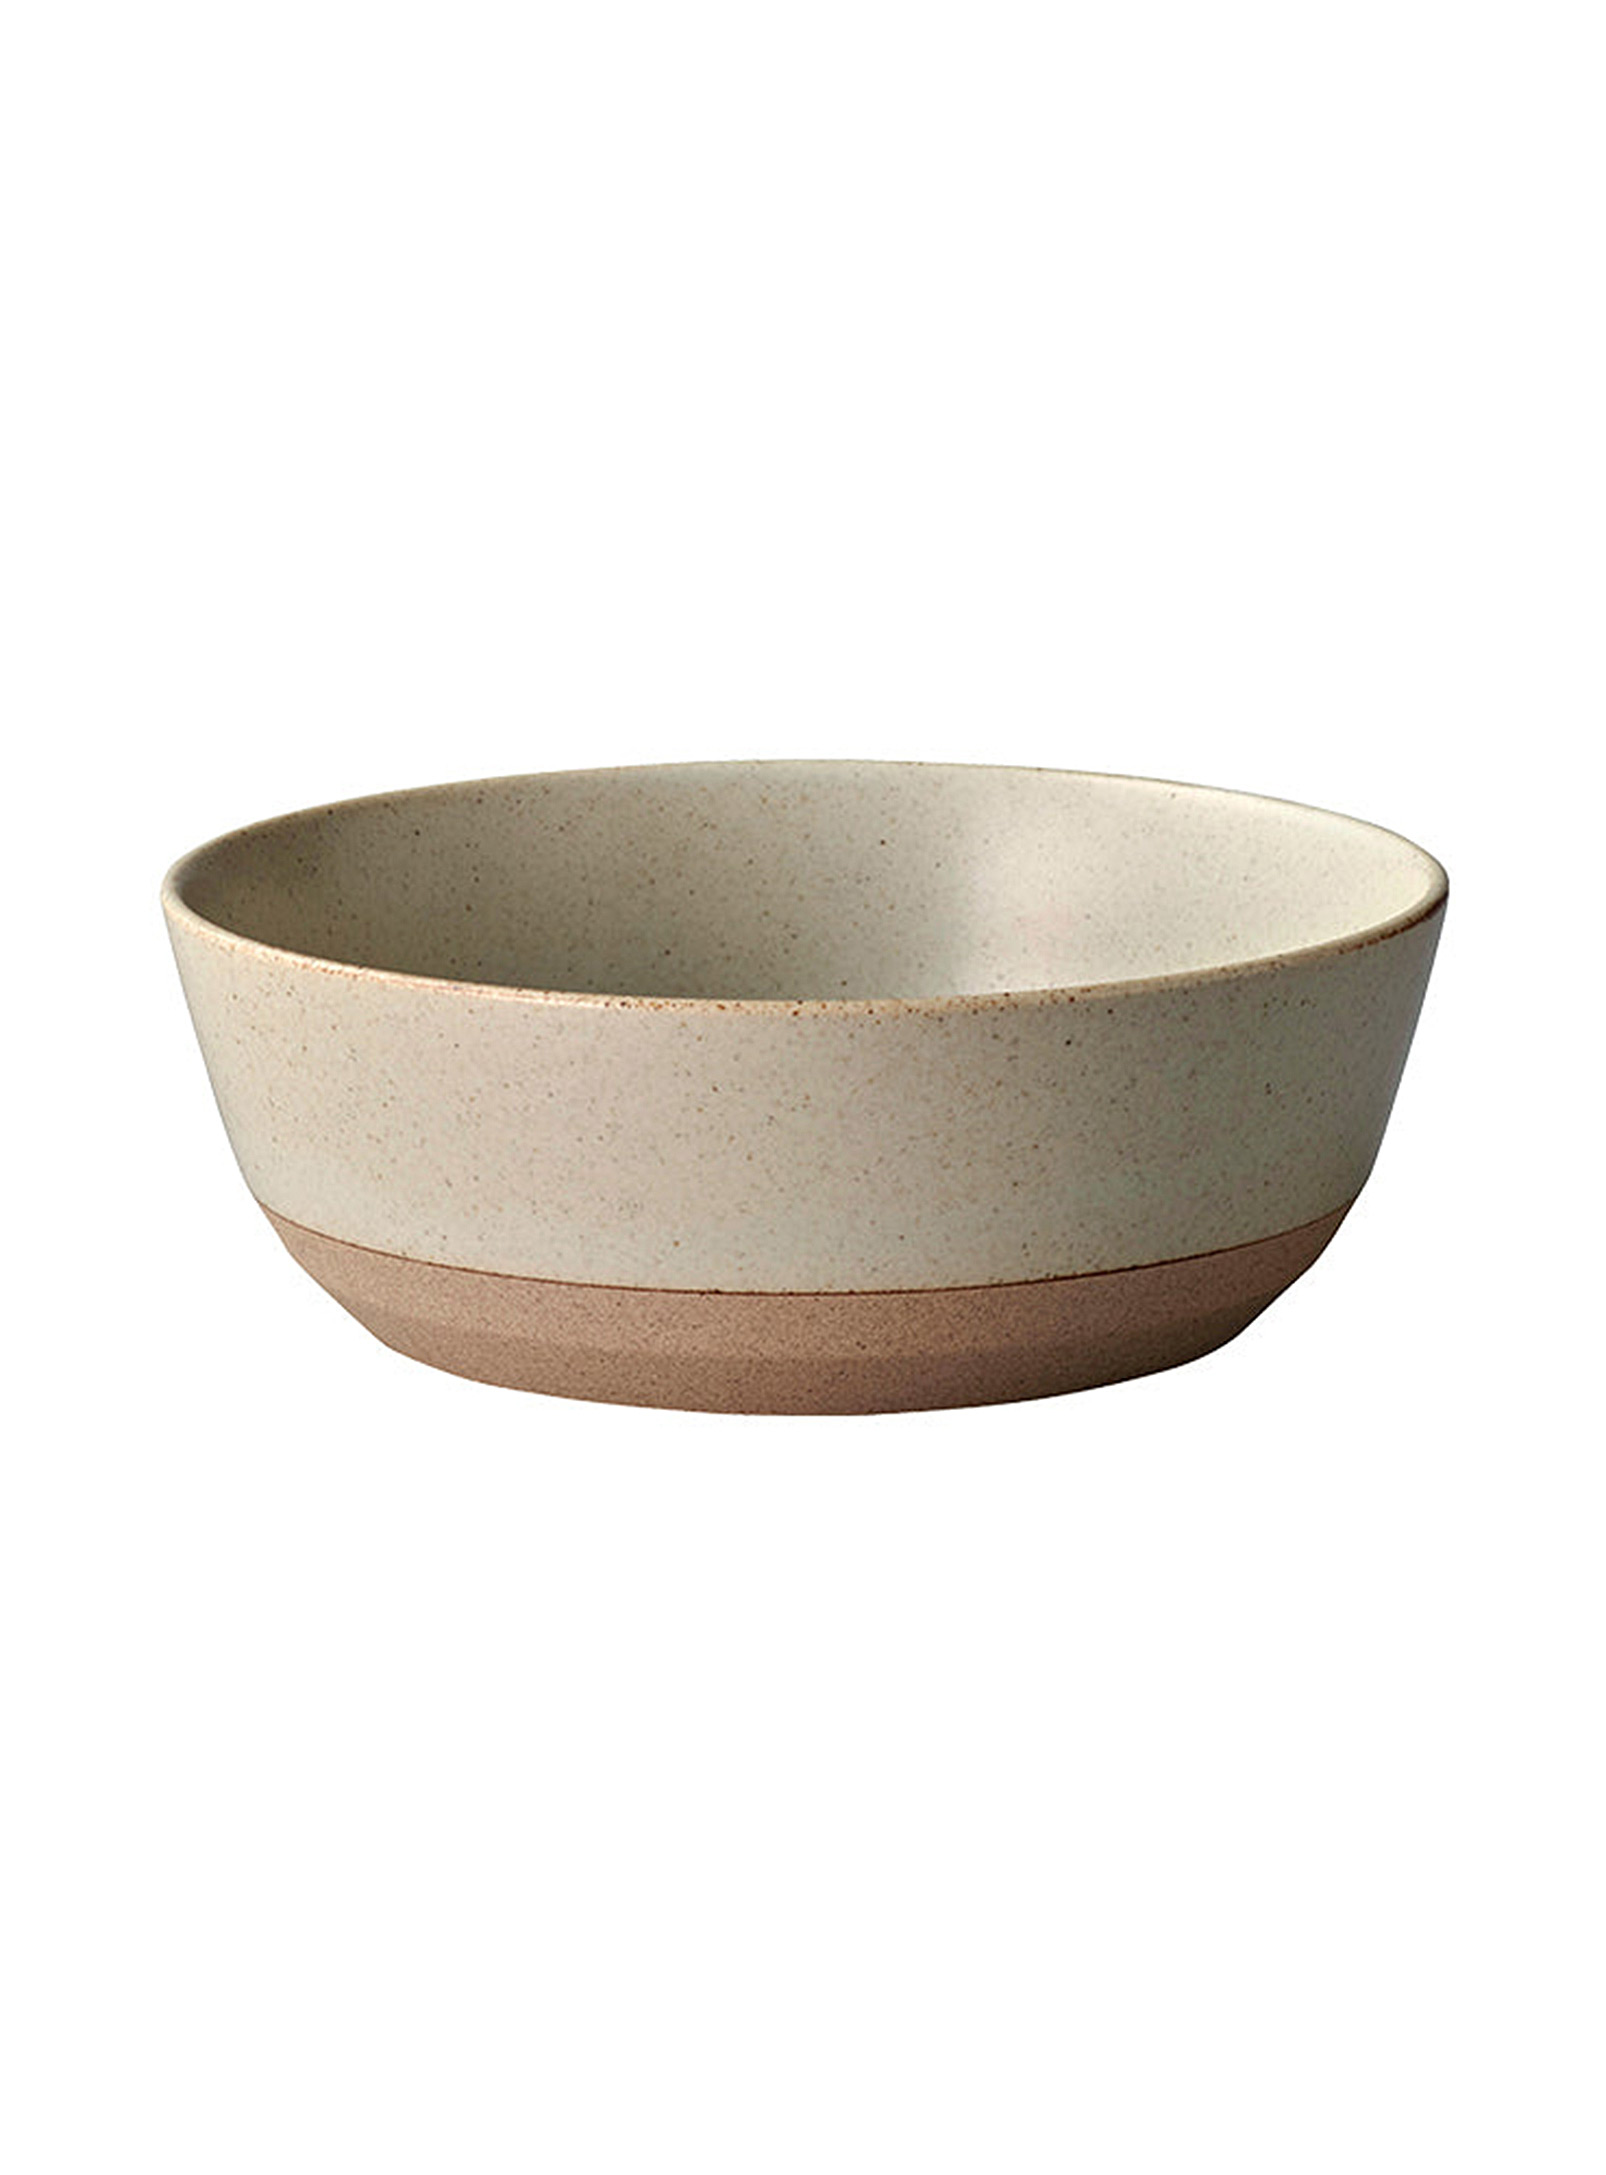 Kinto Two-tone Large Porcelain Bowls Set Of 3 In Neutral